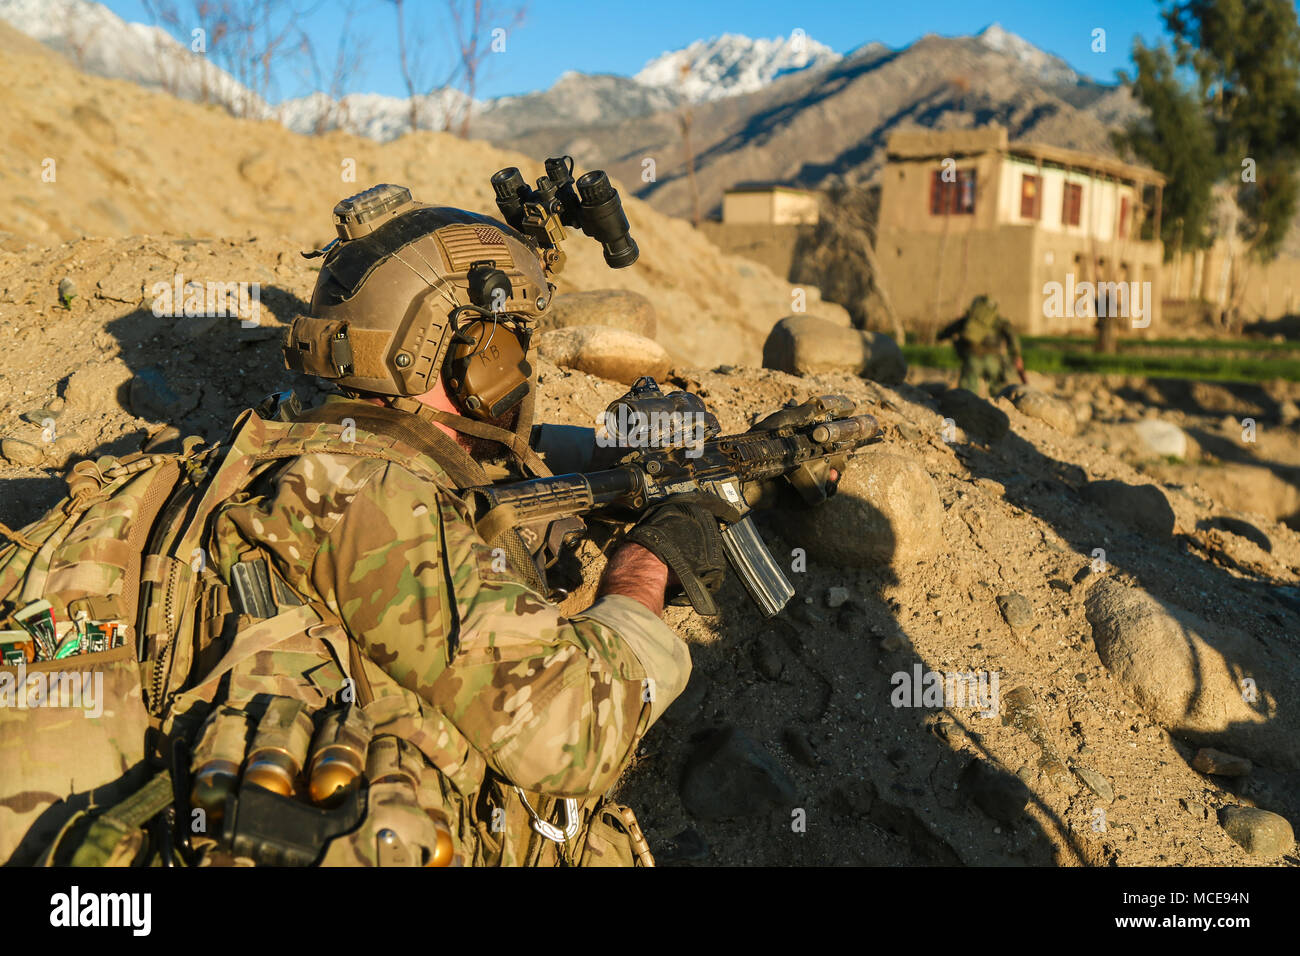 A U.S. Army Special Forces Soldier, attached to Special Operations Task Force-Afghanistan, provides rear security as an Afghan Commando assault force raids a compound of interest during an operation in the Alingar district, Laghman province, Afghanistan, Feb. 18, 2018. The purpose of this operation was to destroy the command and control element of the Taliban in the area and force the remaining forces out of the valley. (U.S. Army photo by Sgt. Connor Mendez) Stock Photo